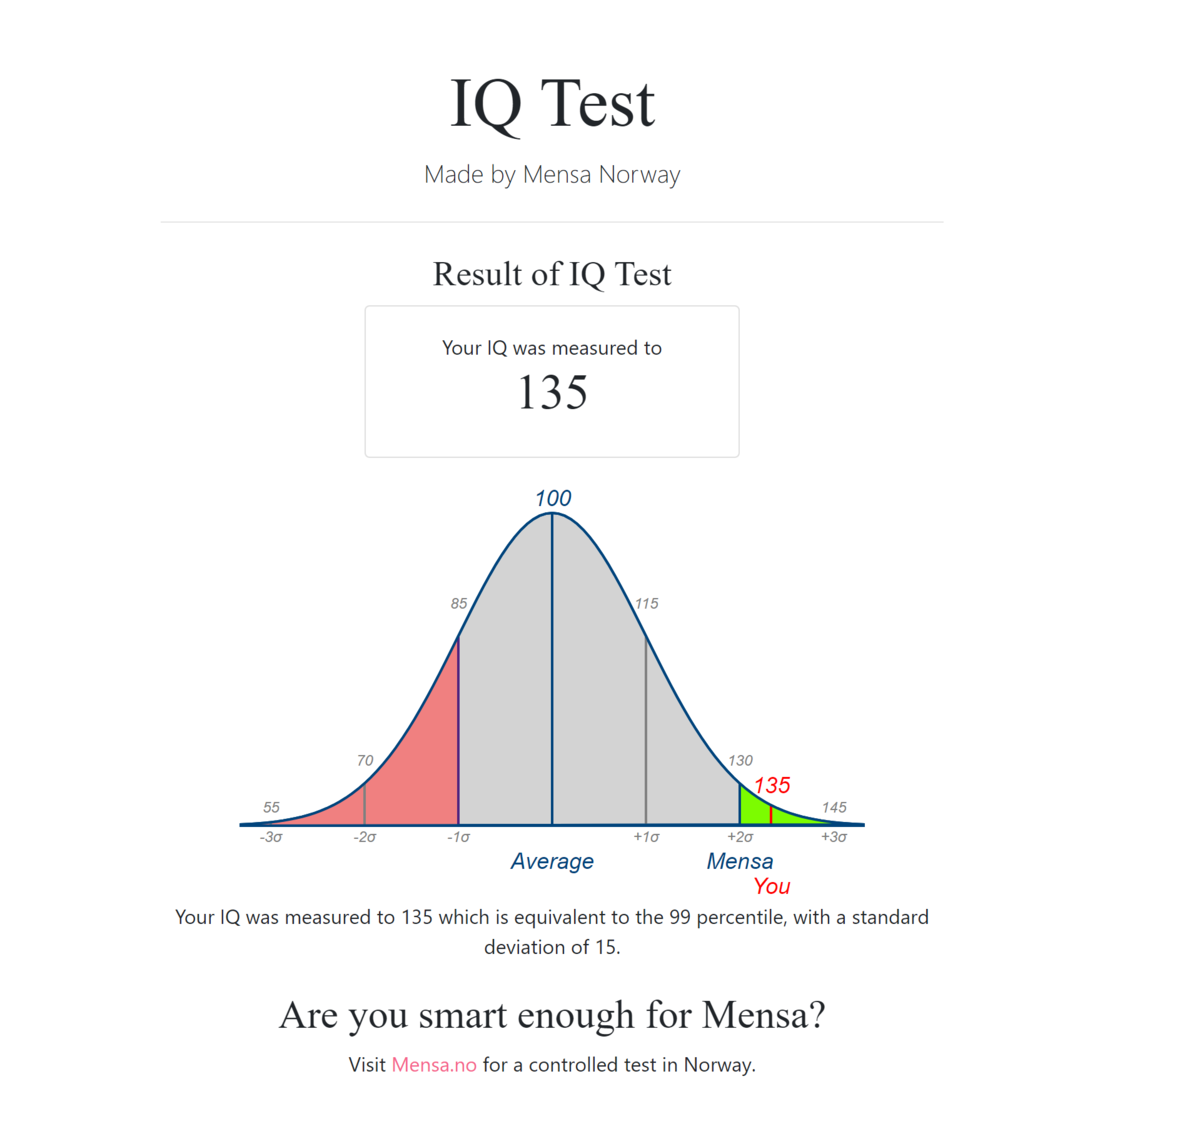 Iq test made by mensa norway